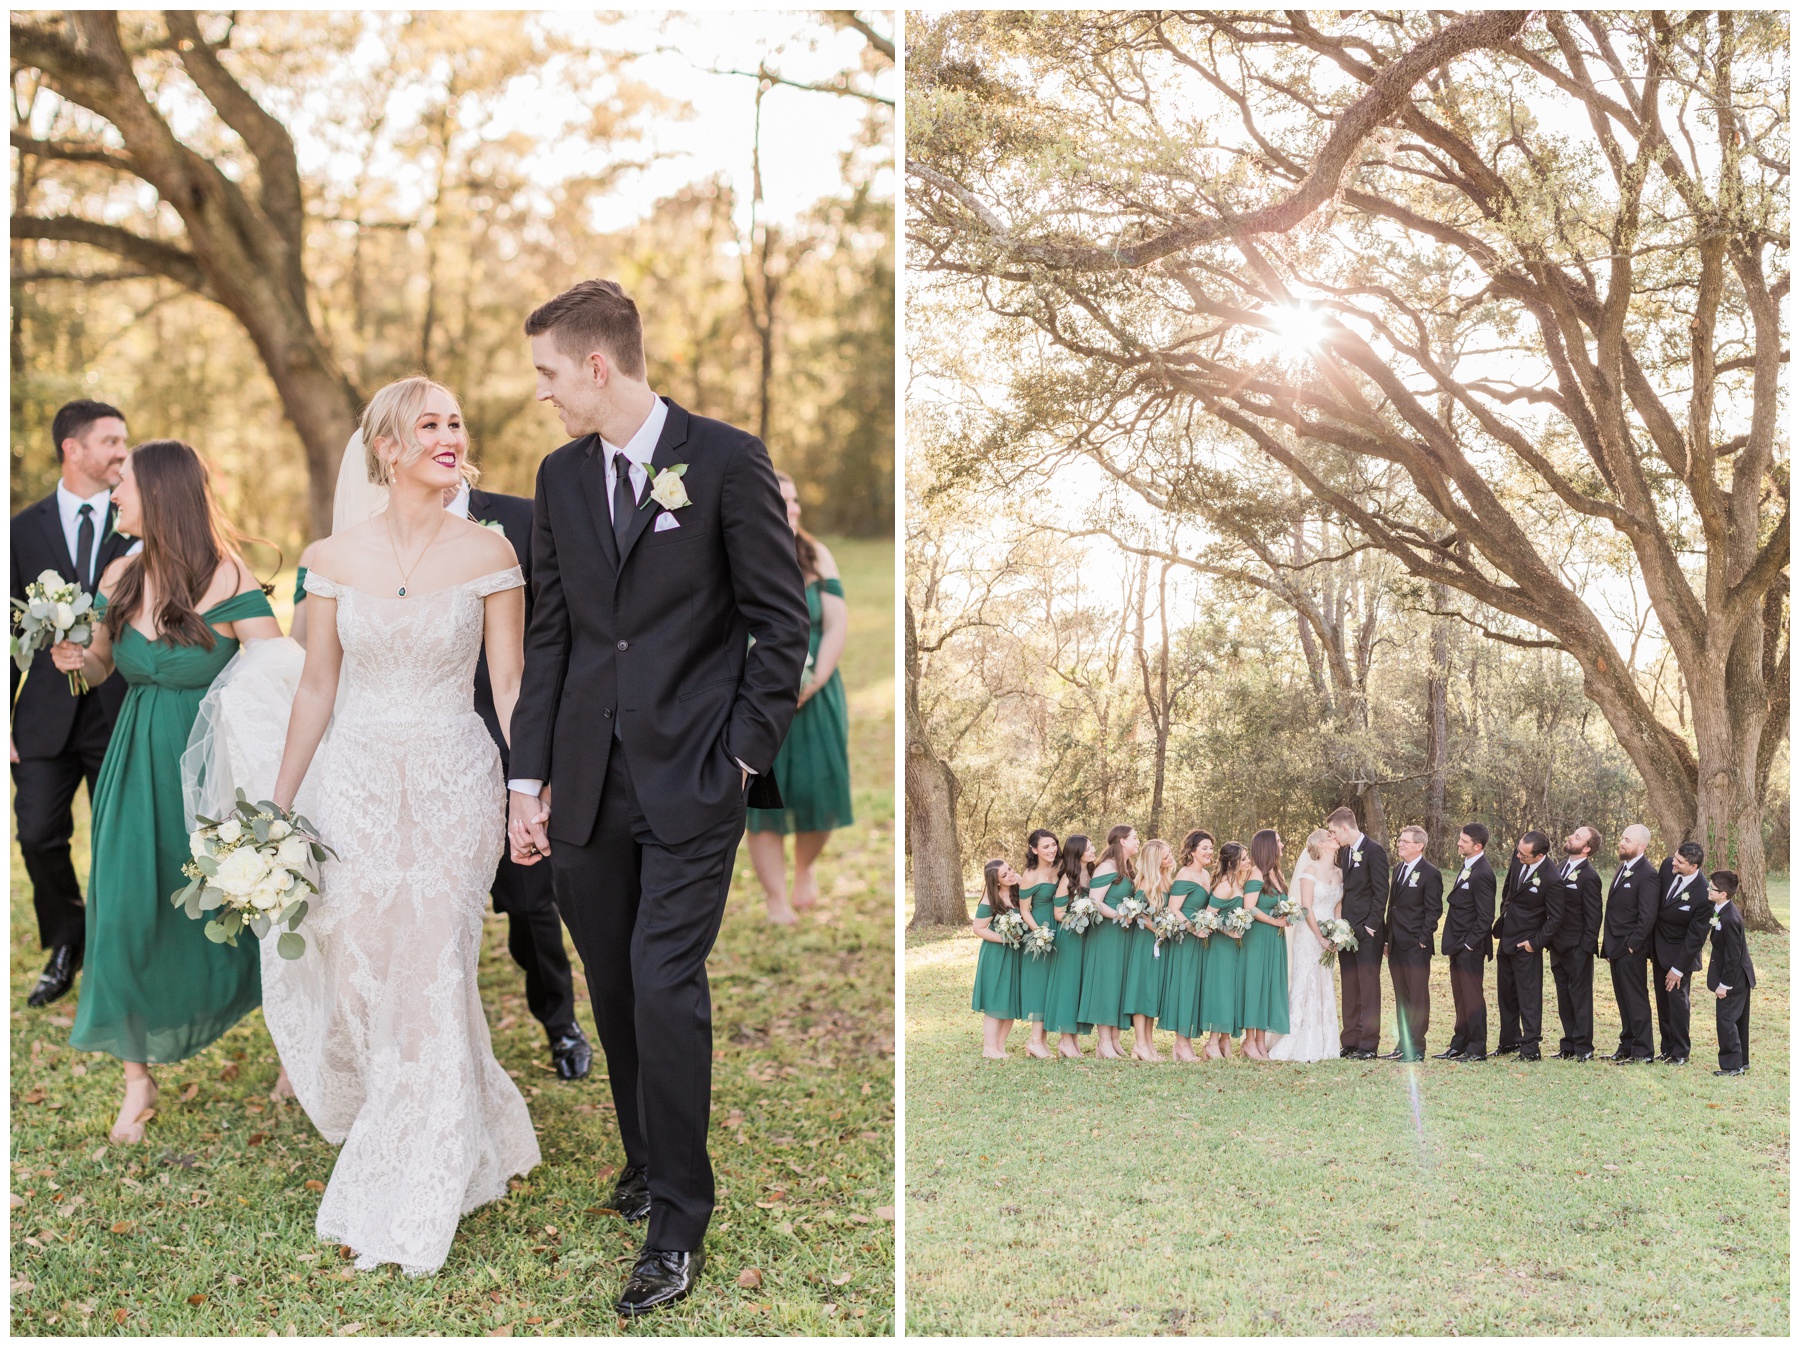 Bridal party portraits at Addison Woods